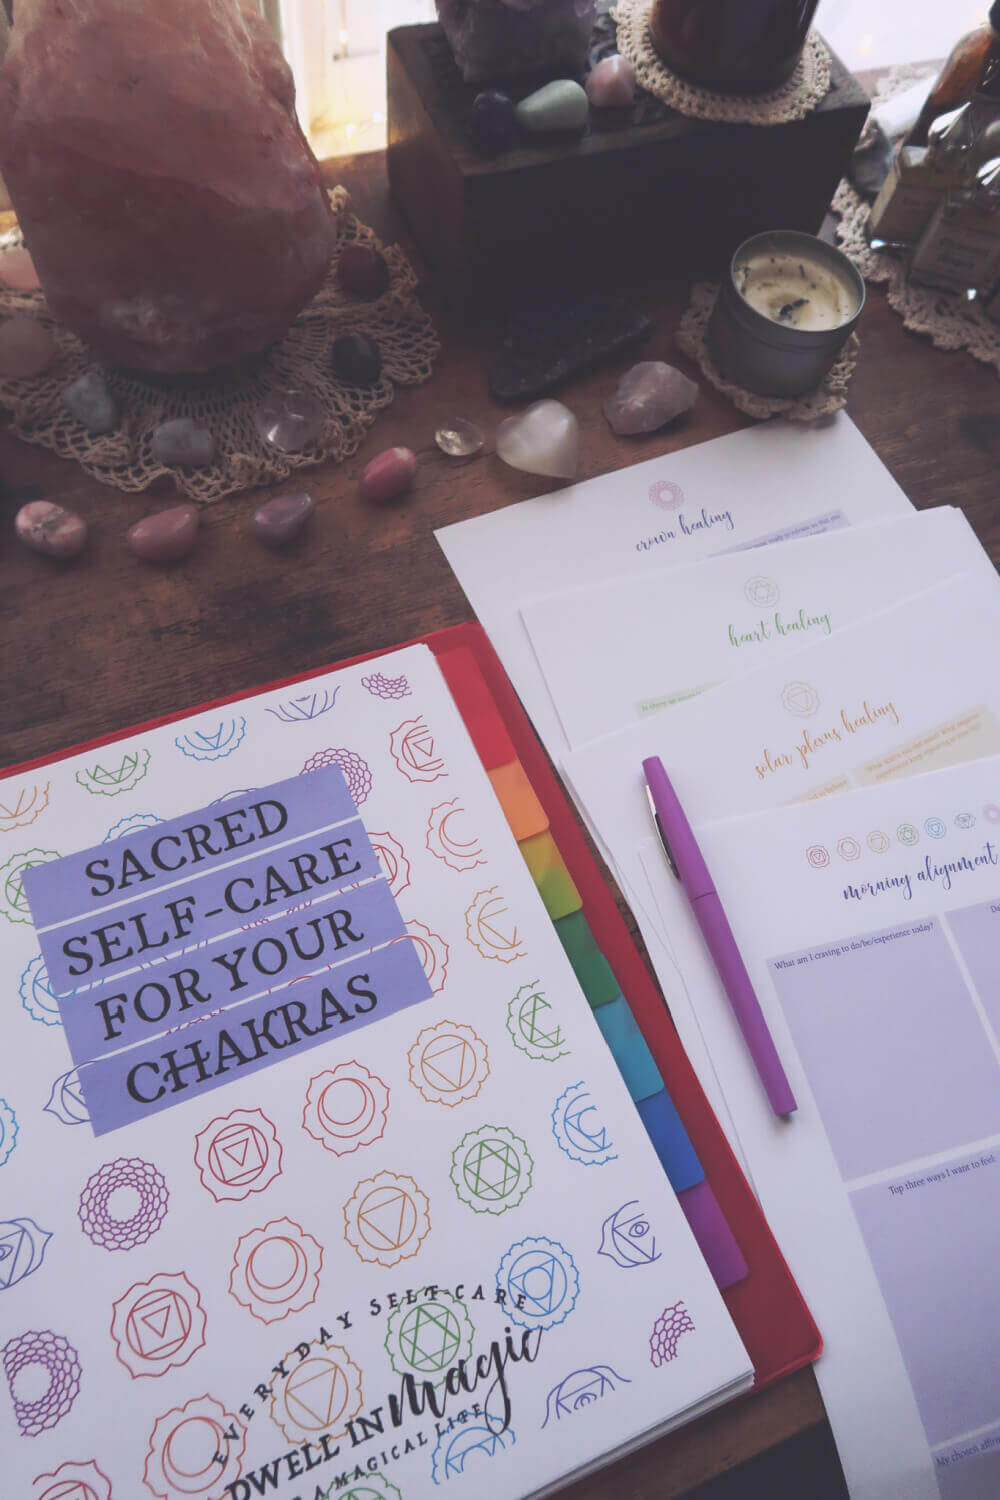 Self-care For Your Chakras journal